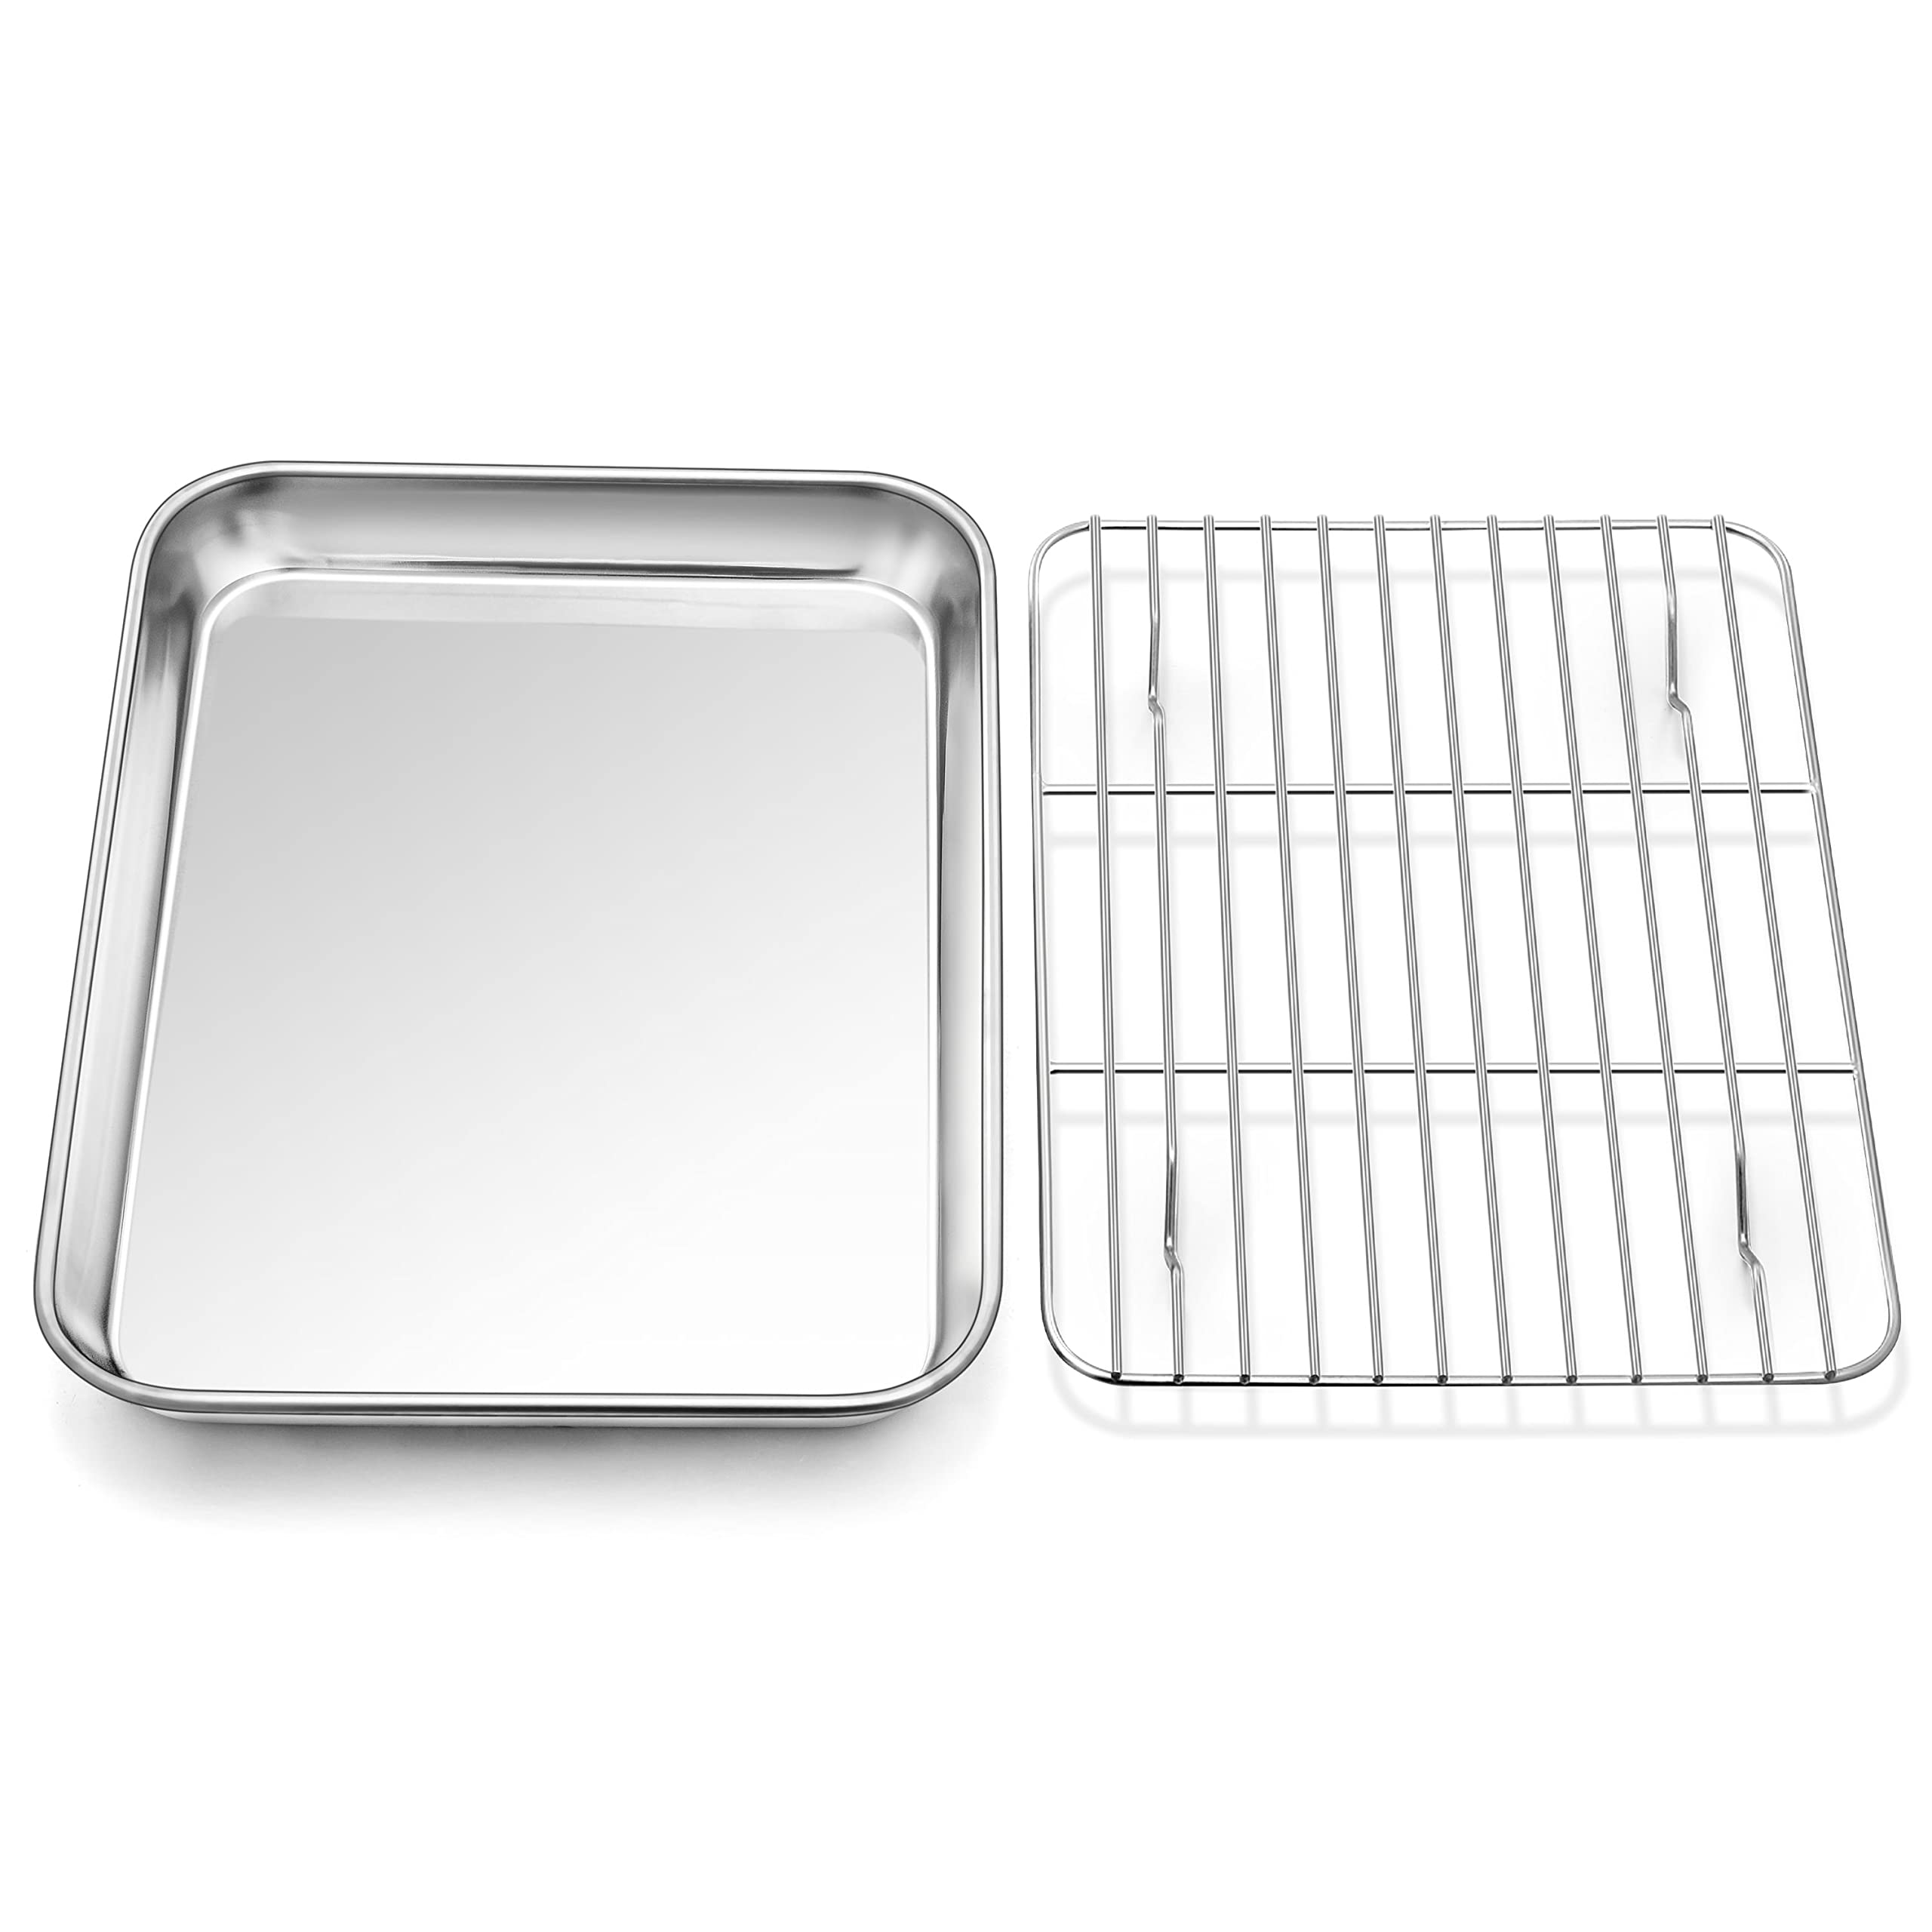 P&P CHEF Toaster Oven Tray and Rack Set, Stainless Steel Baking Pan with Cooling Rack, Fit Your Small Oven & Single Person Use, Non Toxic & Easy Clean